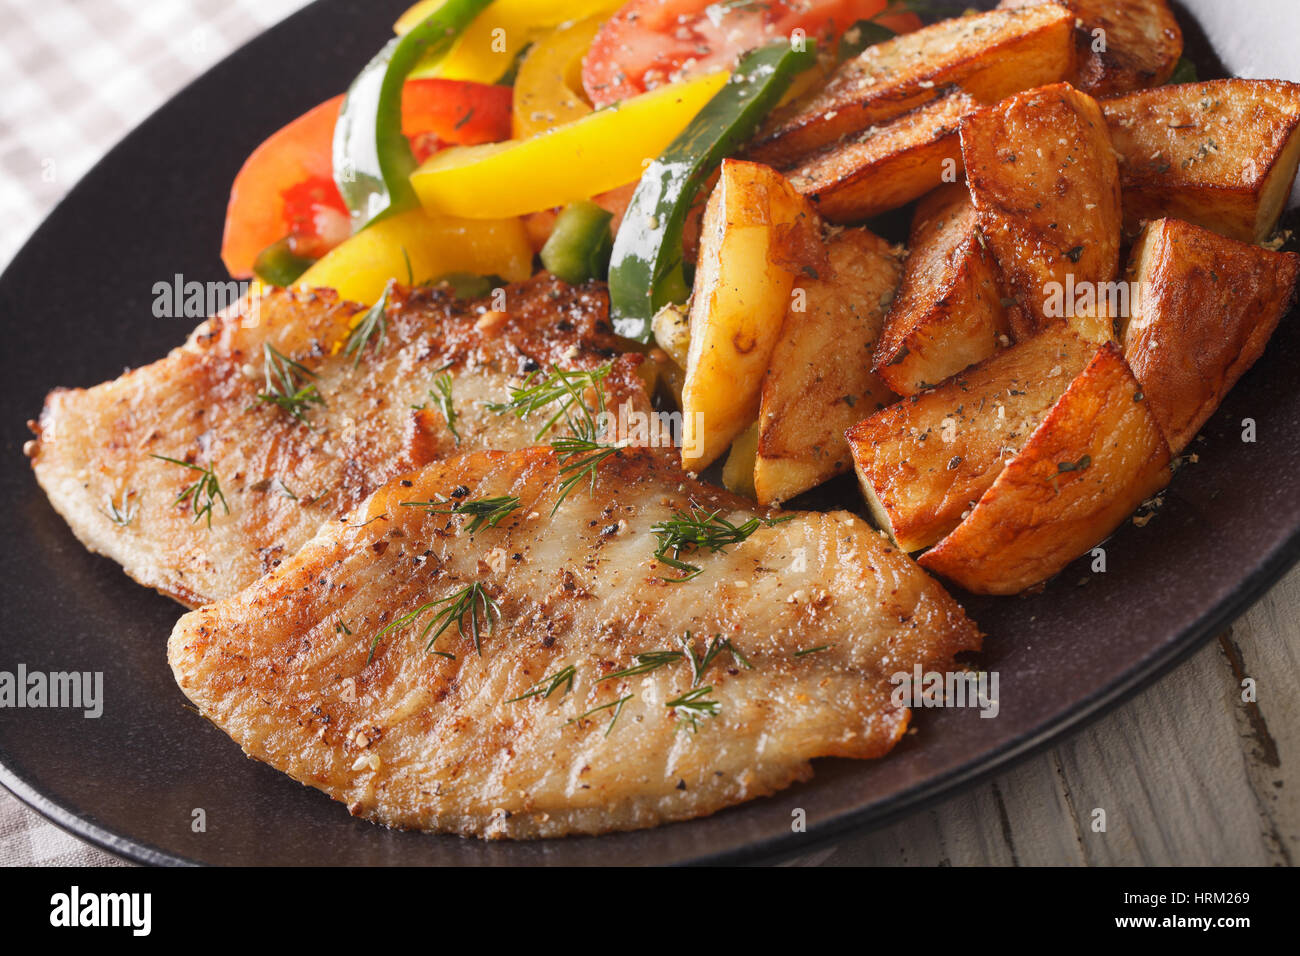 White fish fillet and potato wedges, fresh salad on a plate close-up. horizontal Stock Photo